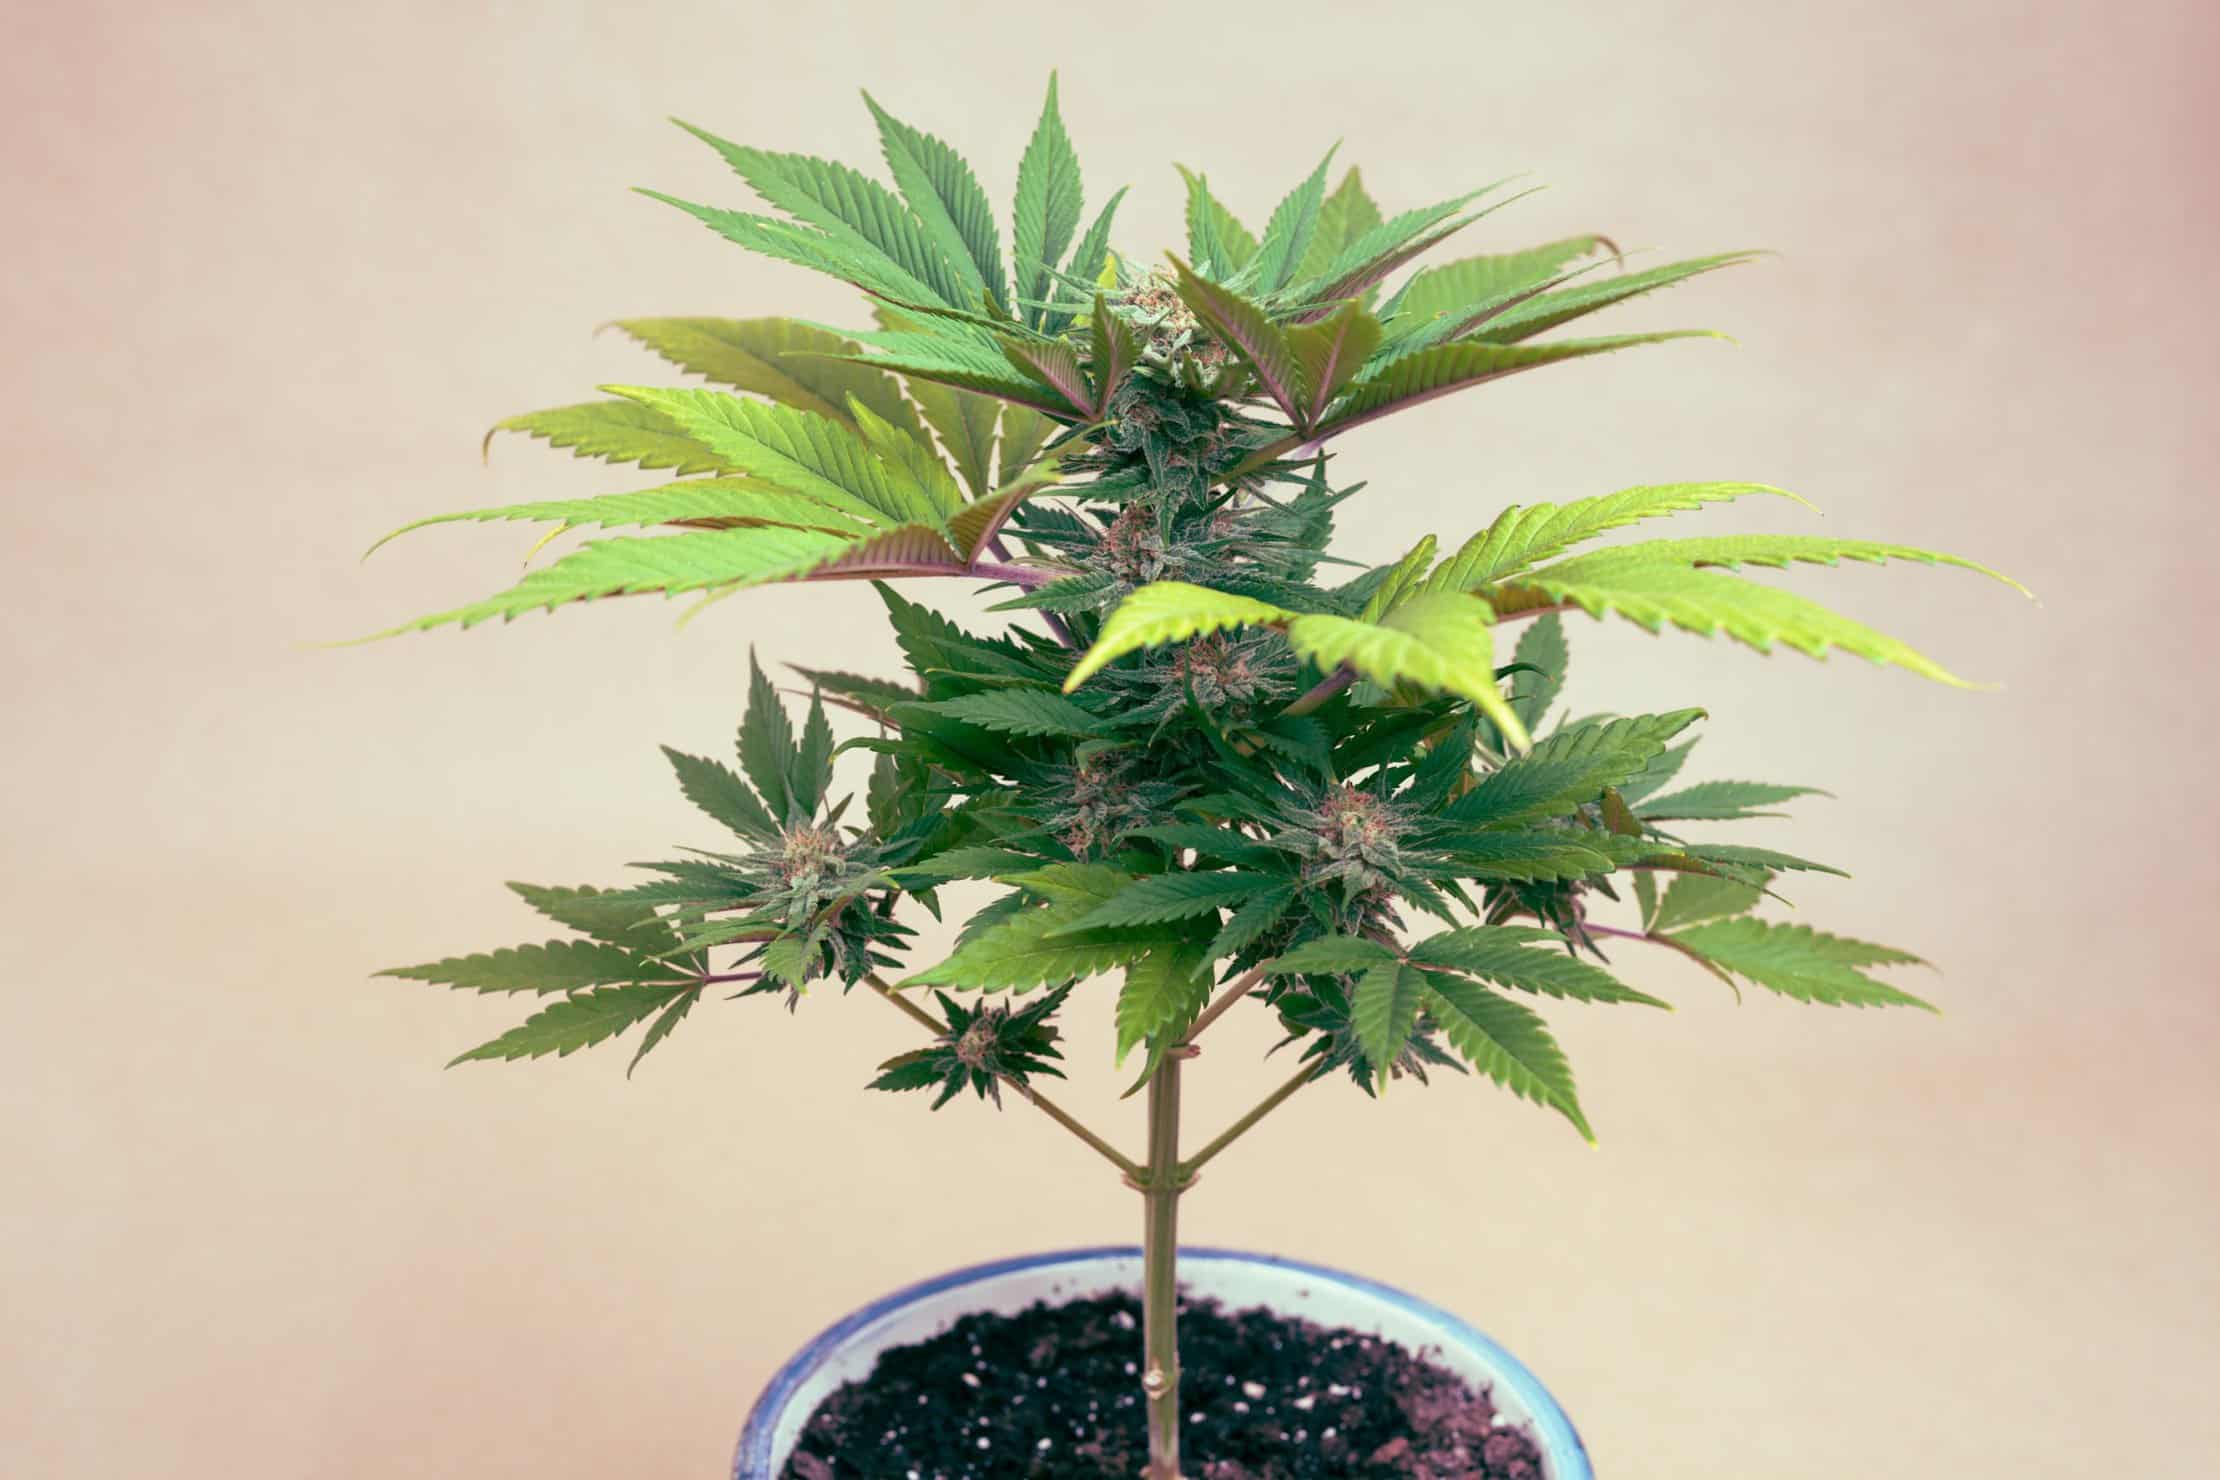 How to Maintain a Healthy Zone for Your Marijuana Plants